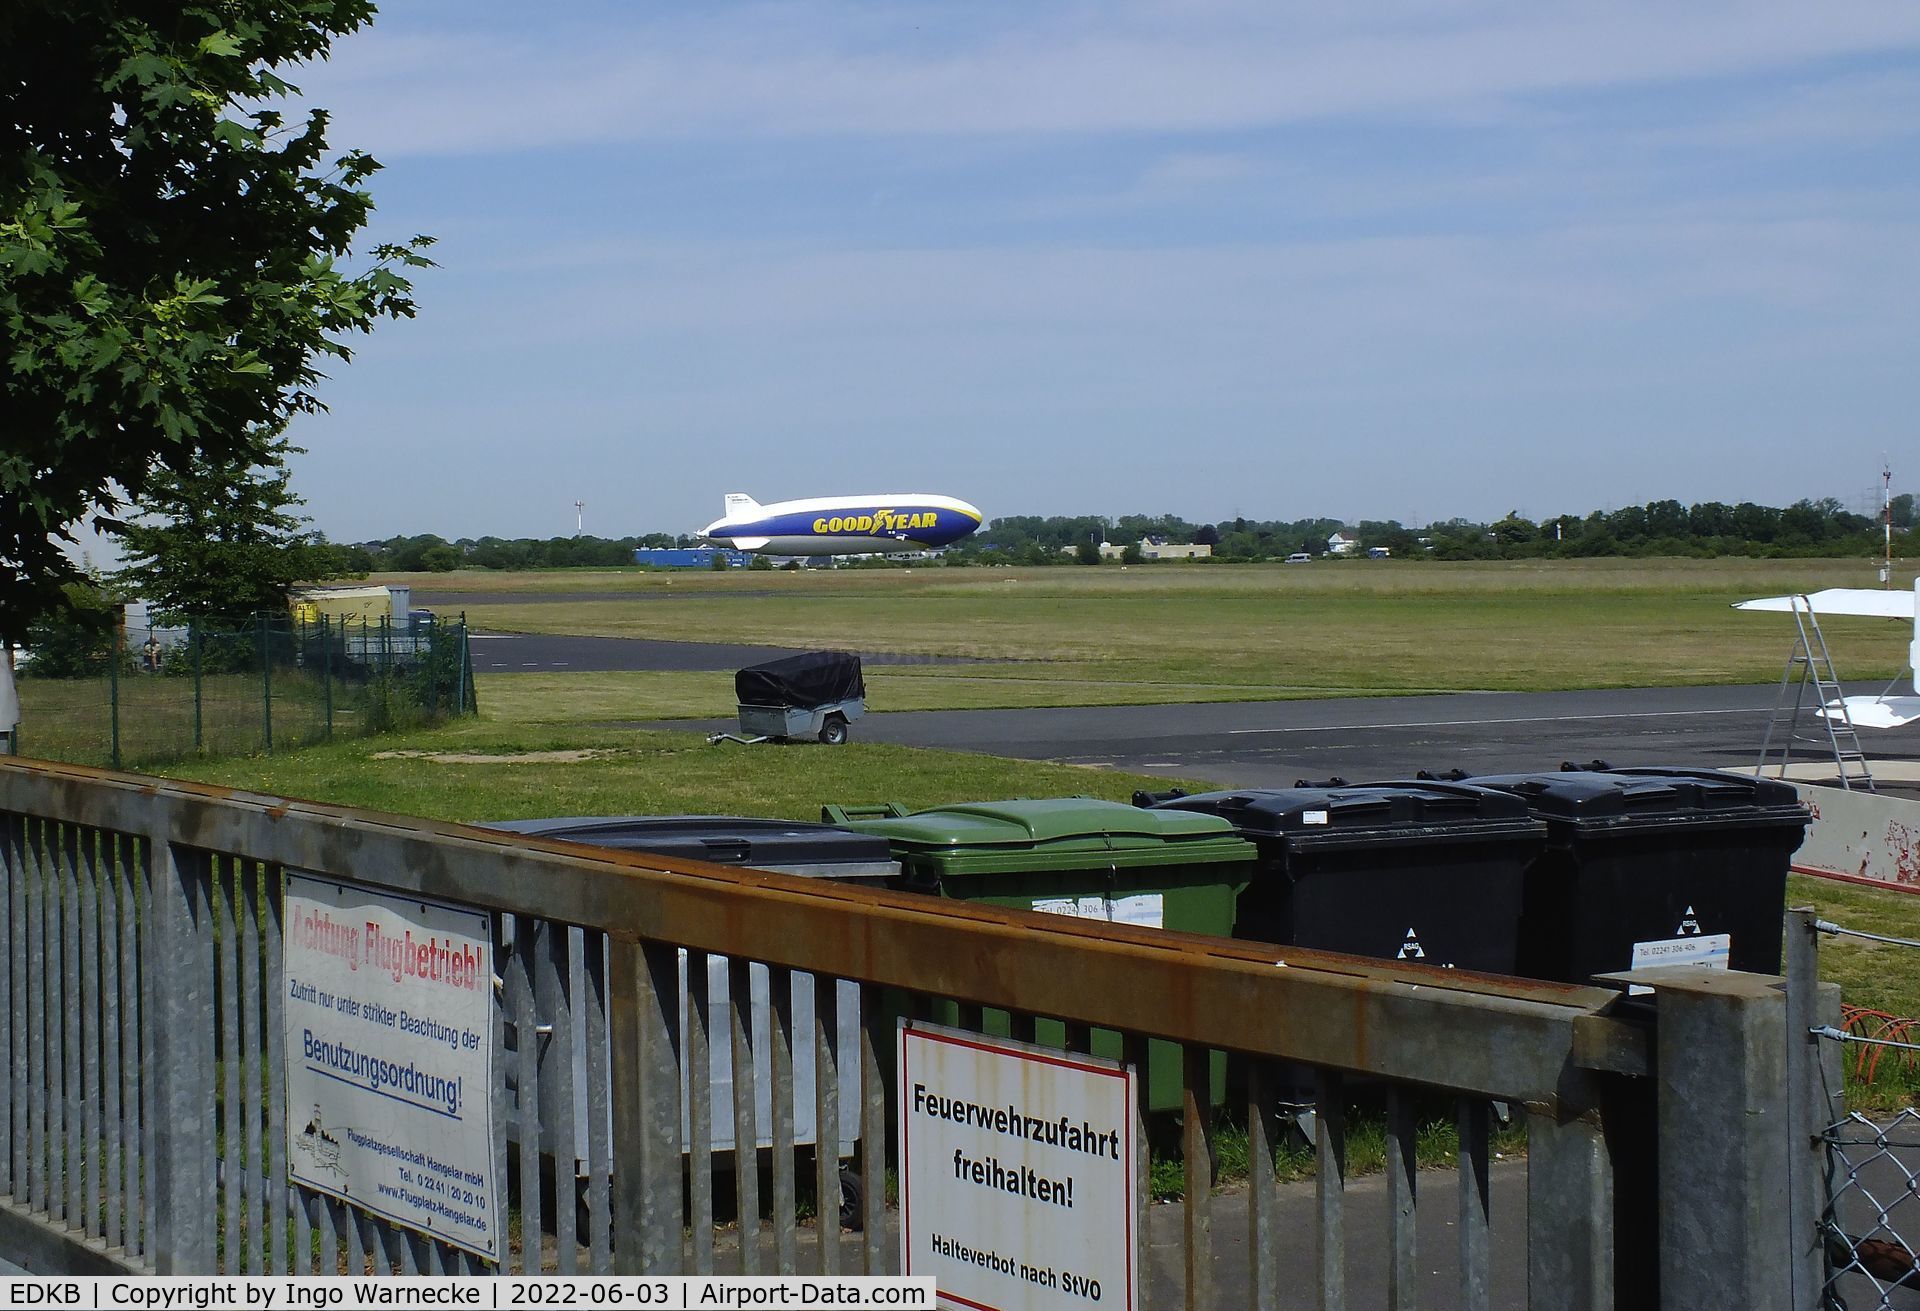 Bonn-Hangelar Airport, Sankt Augustin Germany (EDKB) - looking across the airfield from the tower to the temporary Zeppelin landing area at Bonn-Hangelar airfield